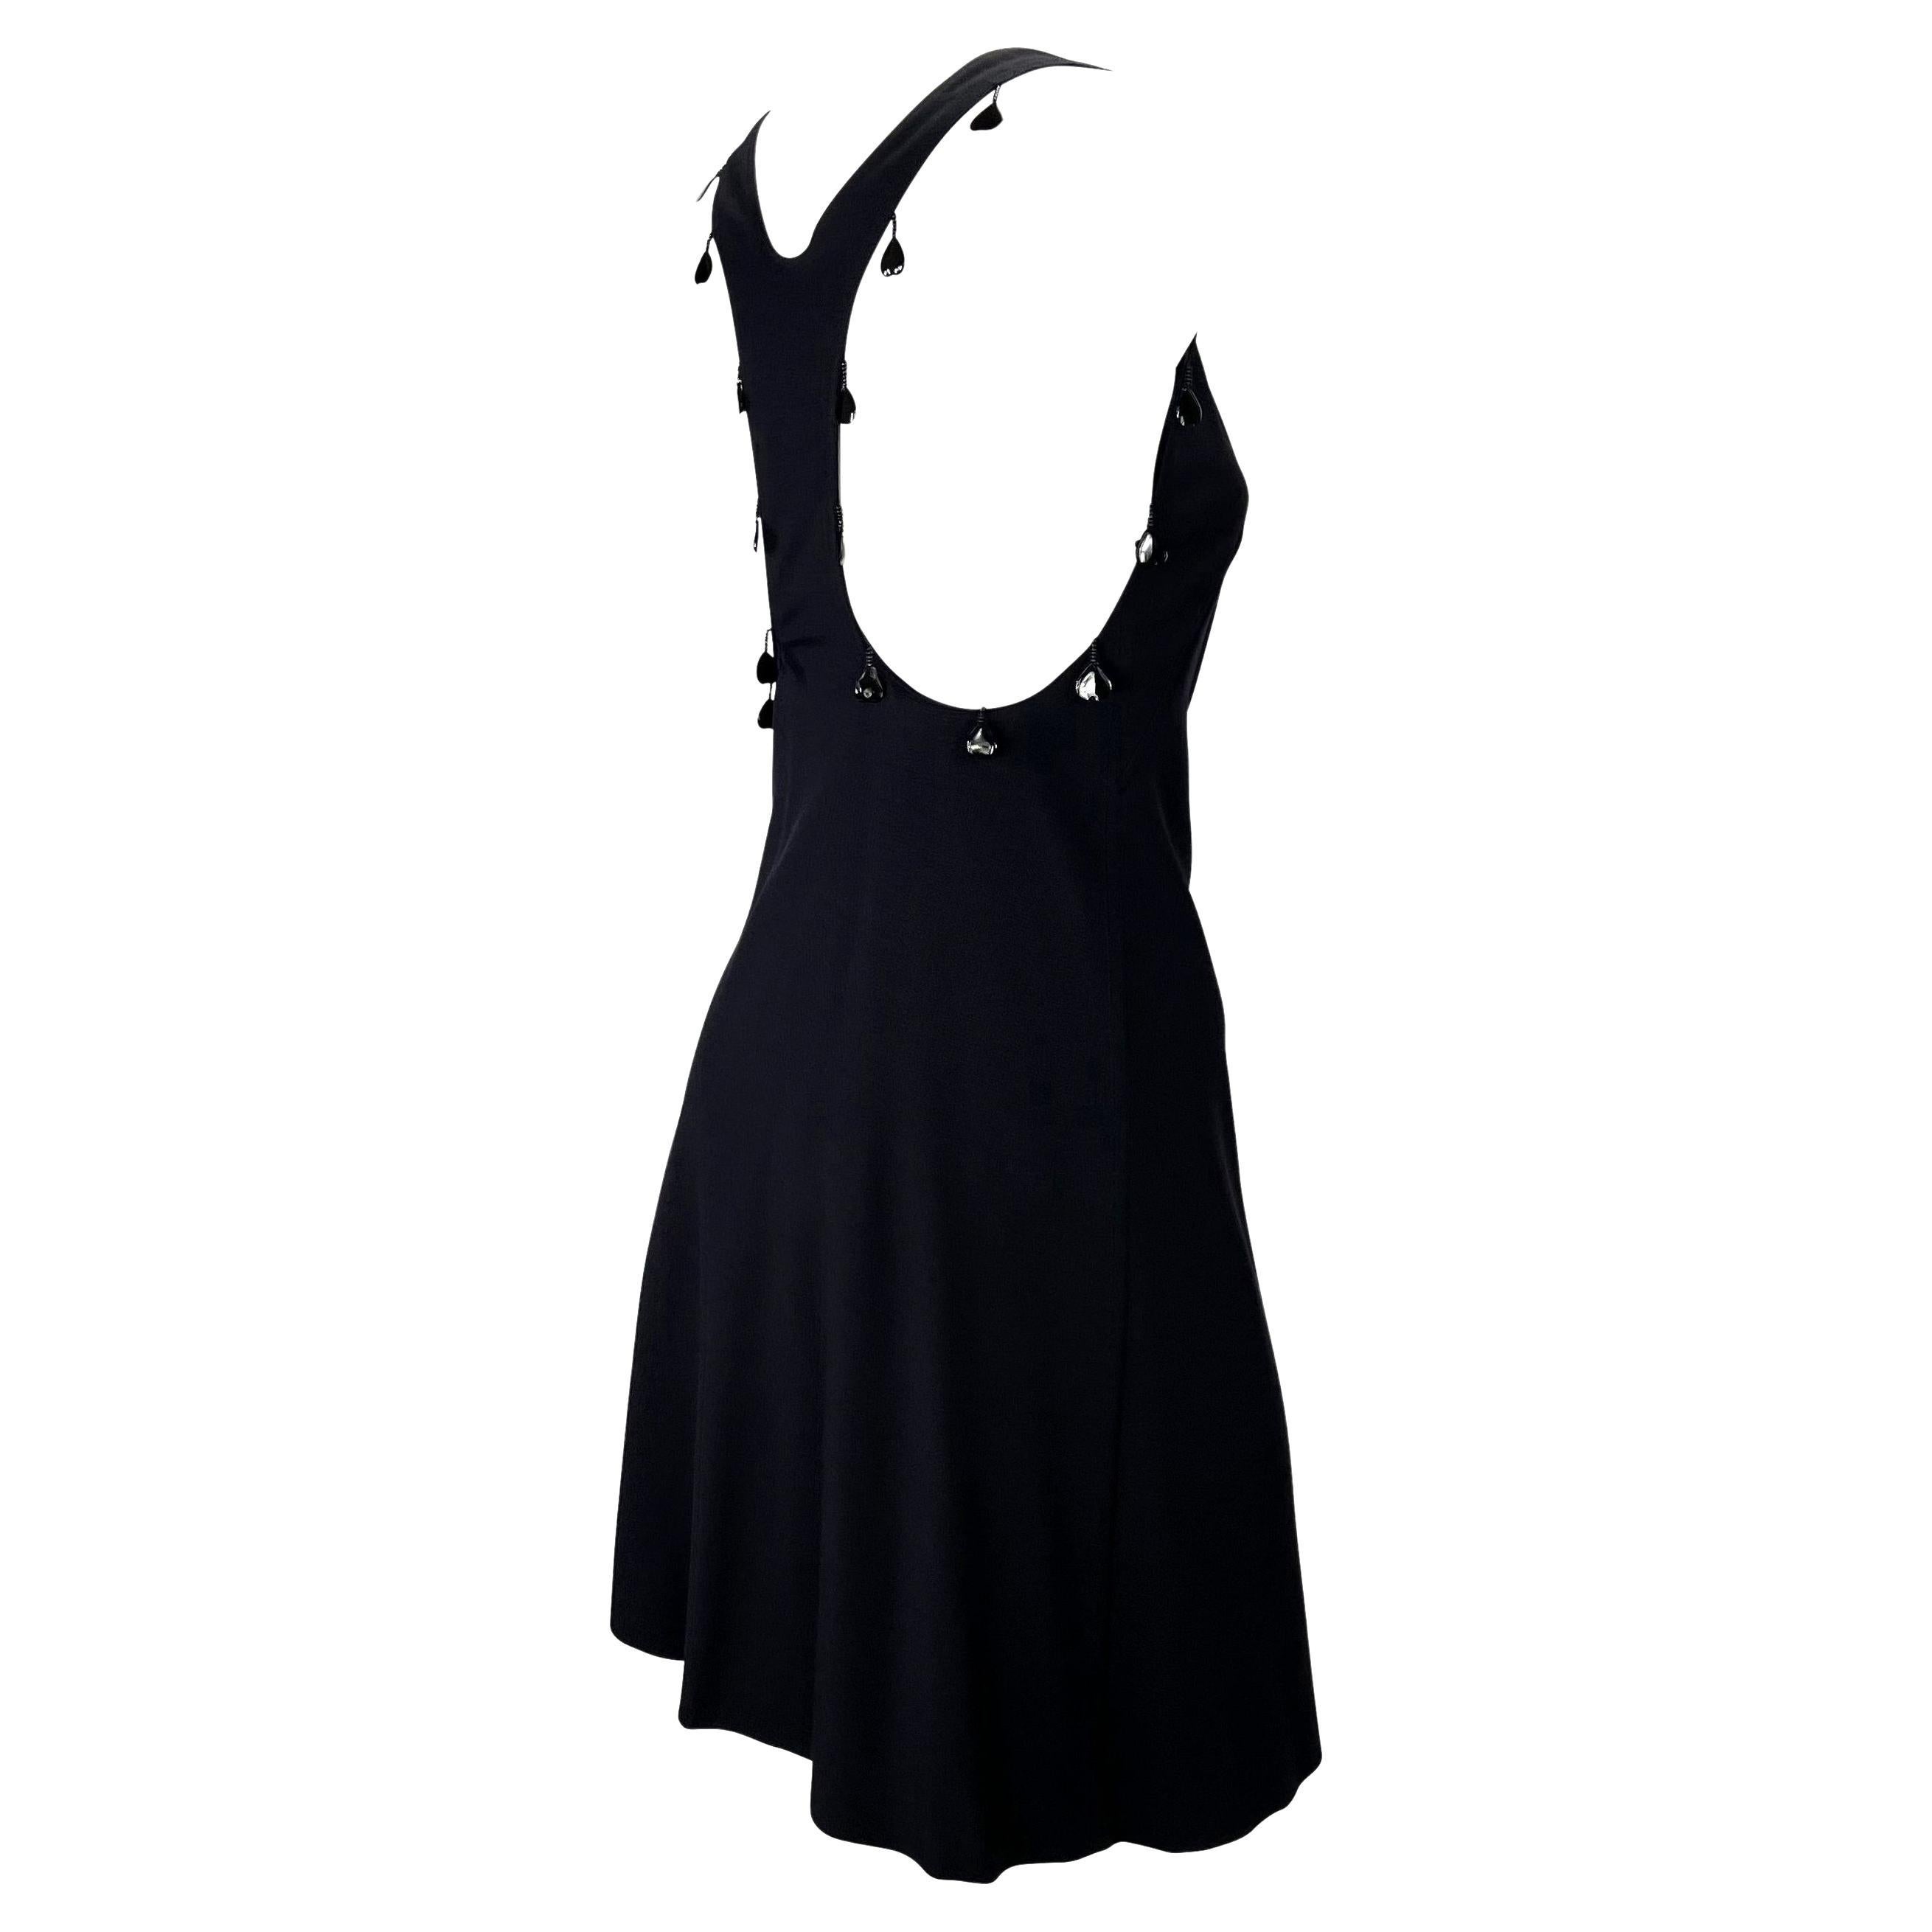 Presenting a black racerback knit Chloé dress, designed by Phoebe Philo. From the Spring/Summer 2004 collection, this beautiful little black dress features a scoop neckline, racerback, flare at the skirt, and is made complete with beaded heart